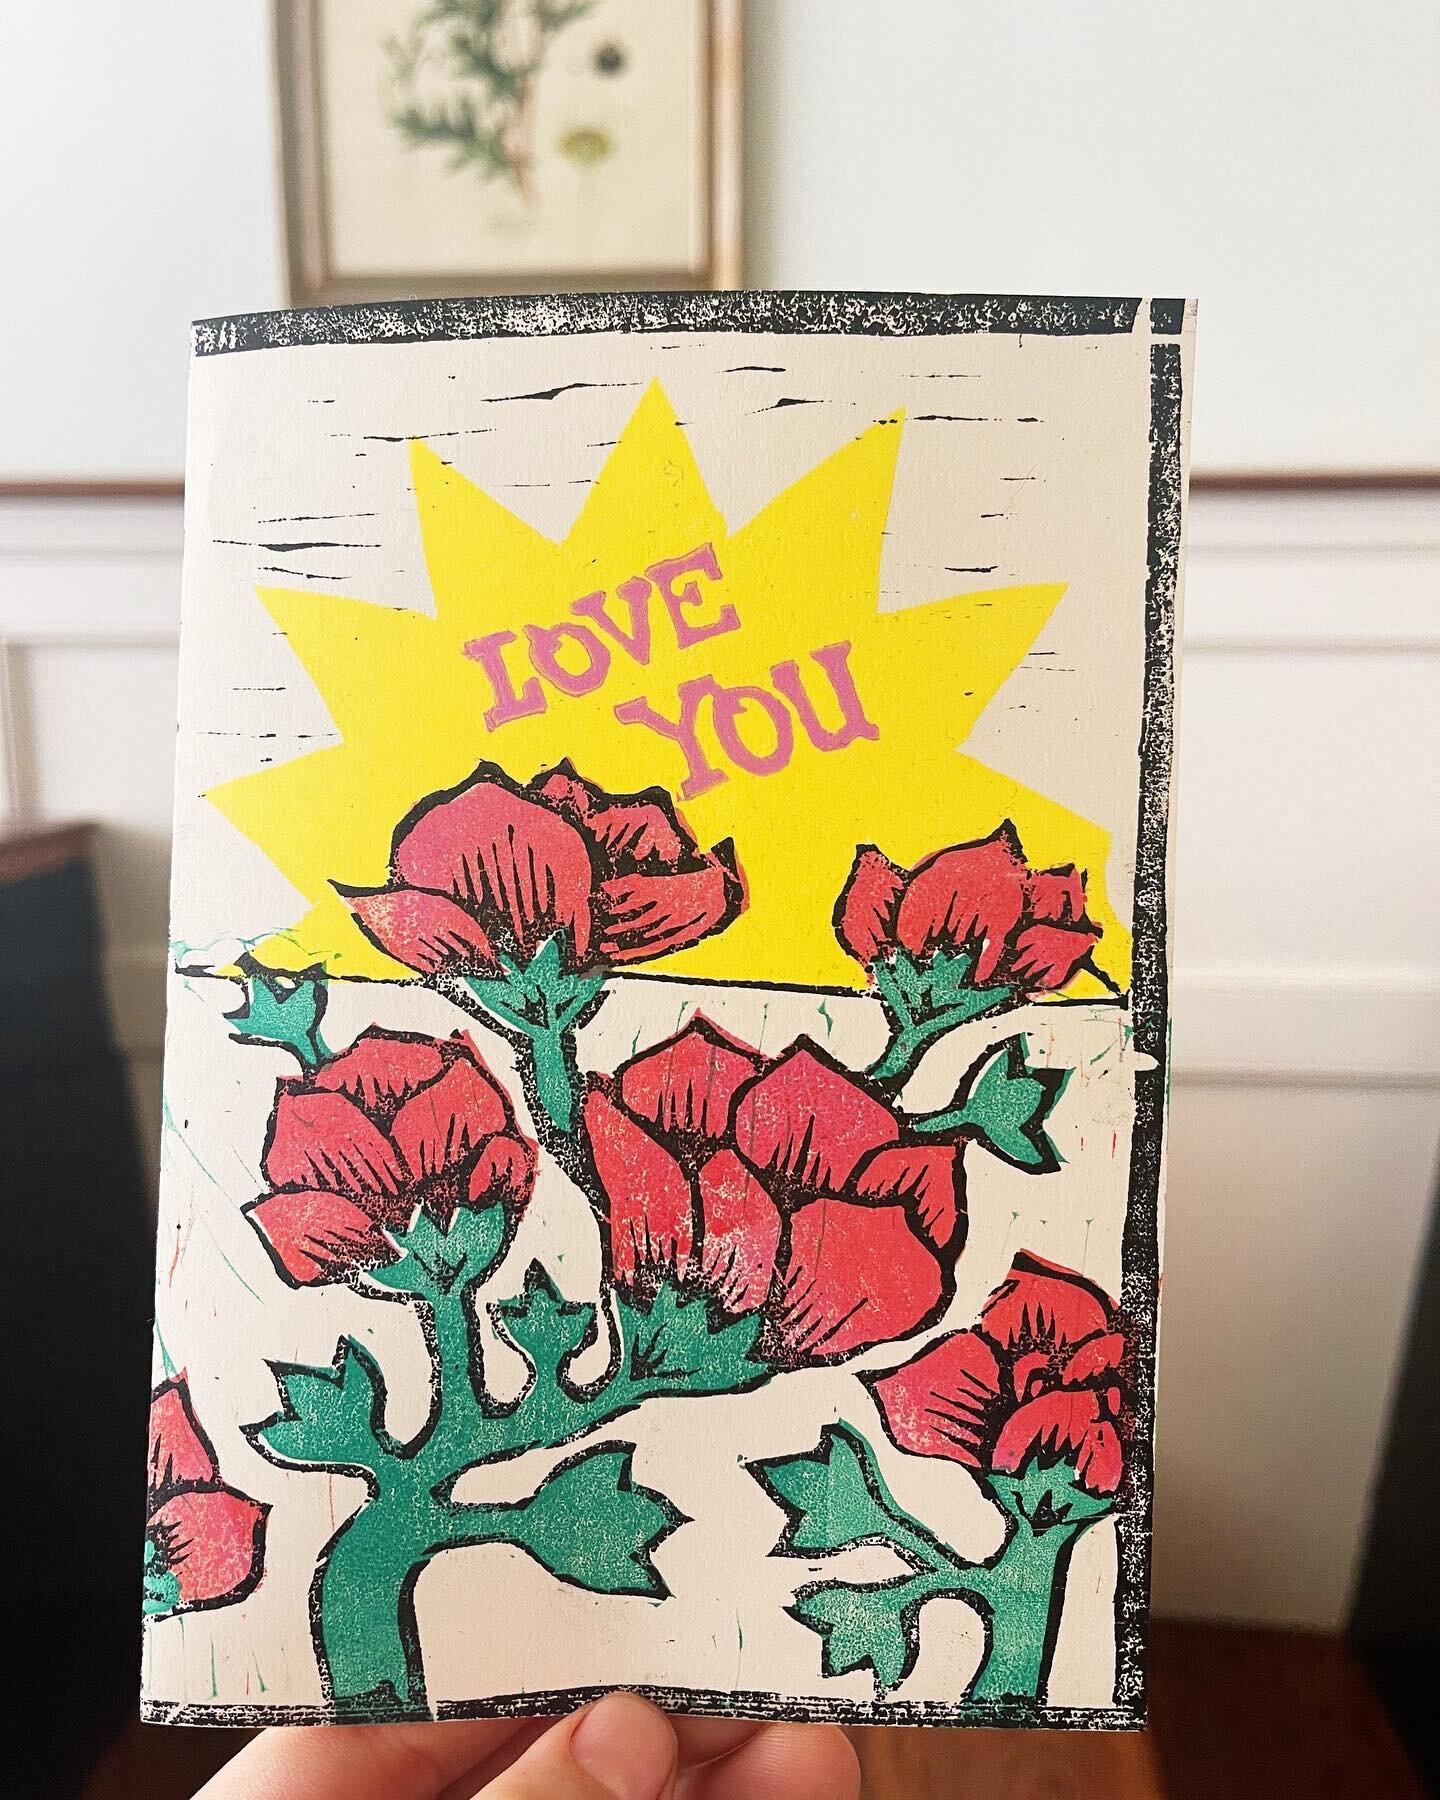 gracie woodcut carved and stamped your valentines in a five color process. everything she makes is either thoughtful and gorgeous, thoughtfully delicious or both at the same time!! don&rsquo;t you worry, procrastinators ogling this beauty and labor o